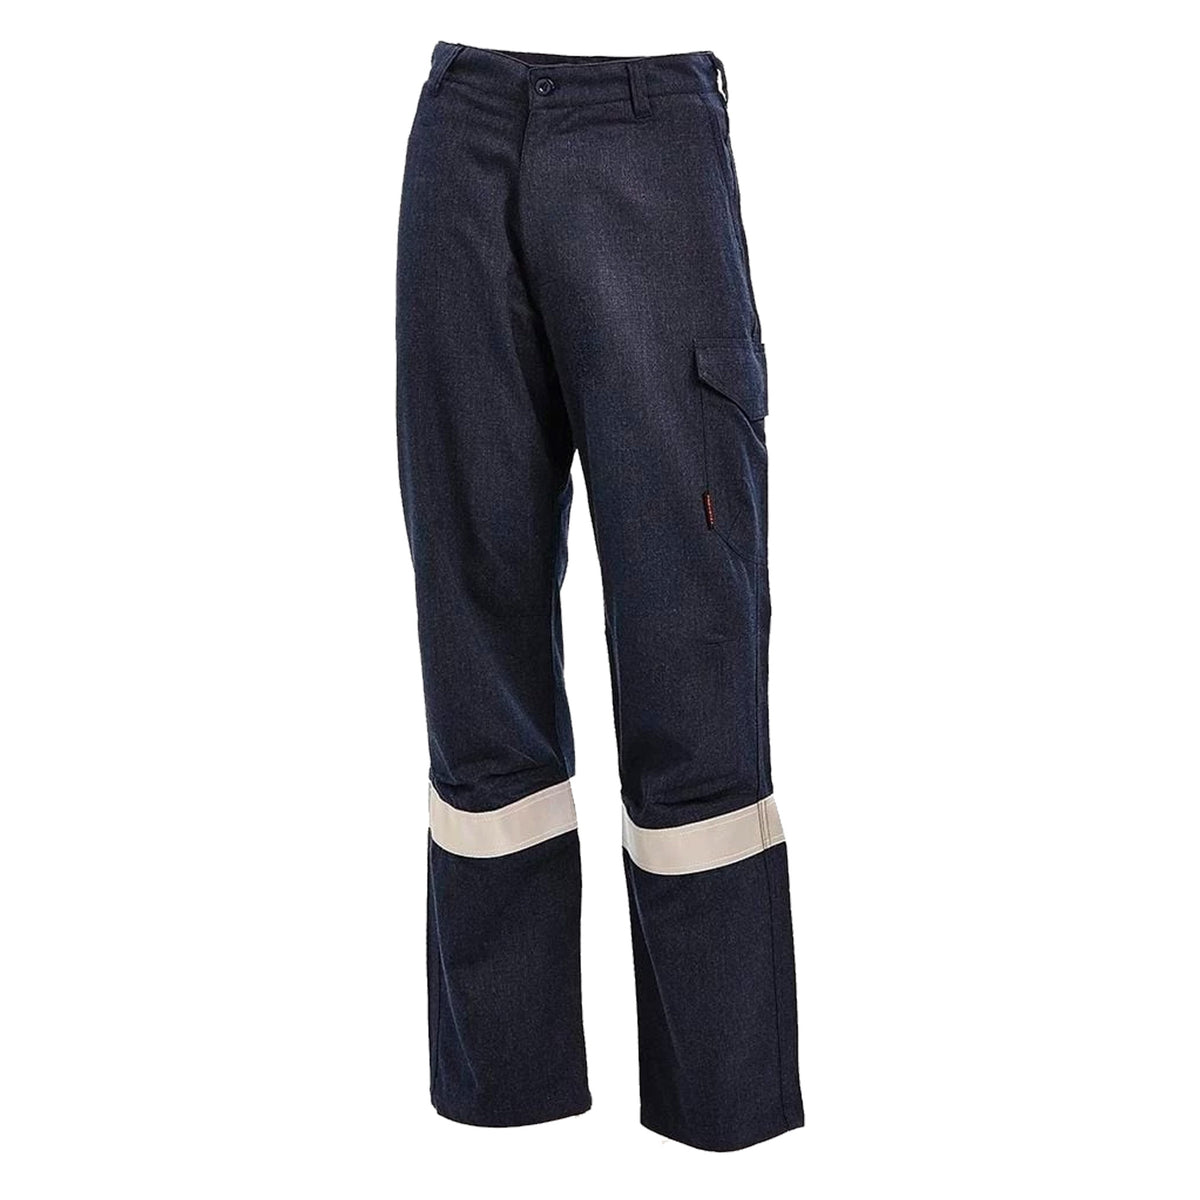 navy fire retardant inherent ripstop vented cargo pant with tape